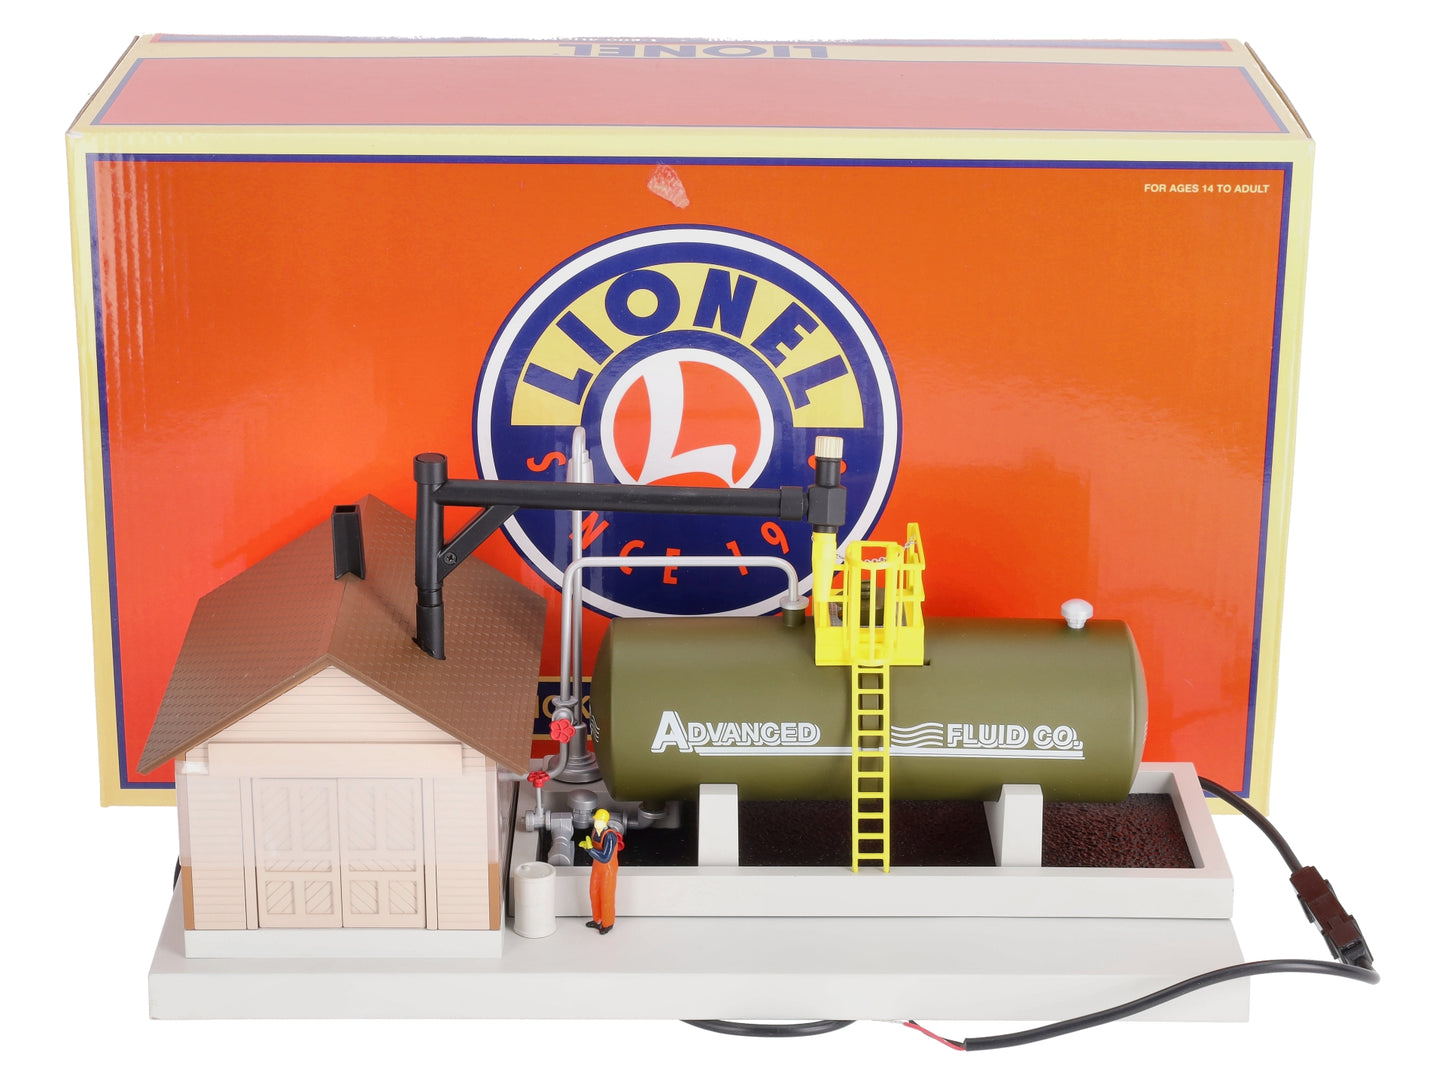 Lionel 6-37821 O Smoke Fluid Loader Kit Command Control Equipped